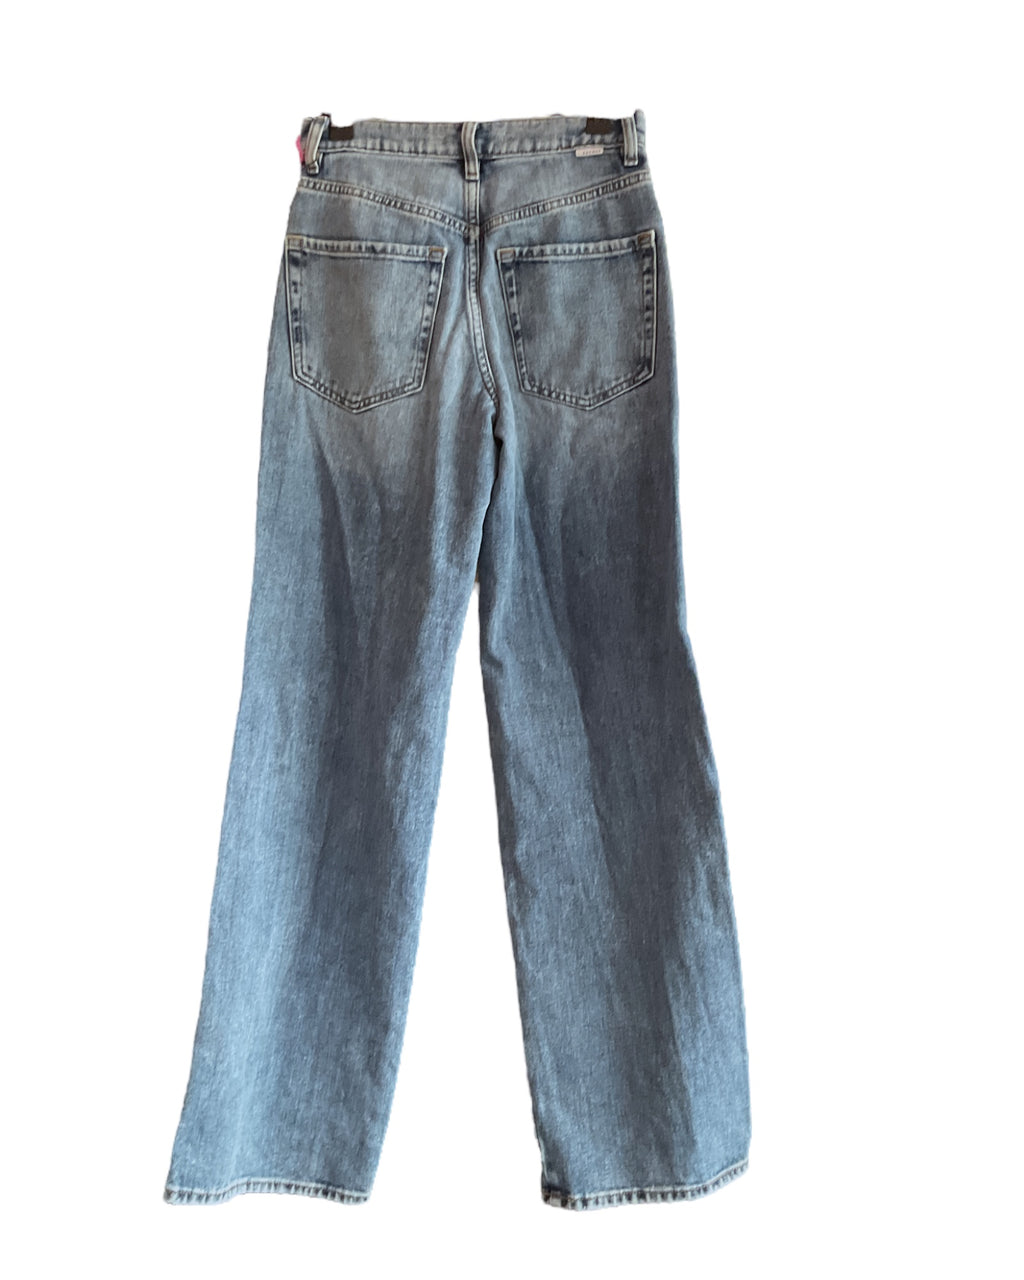 Pacsun Distressed Baggy Jeans, 23